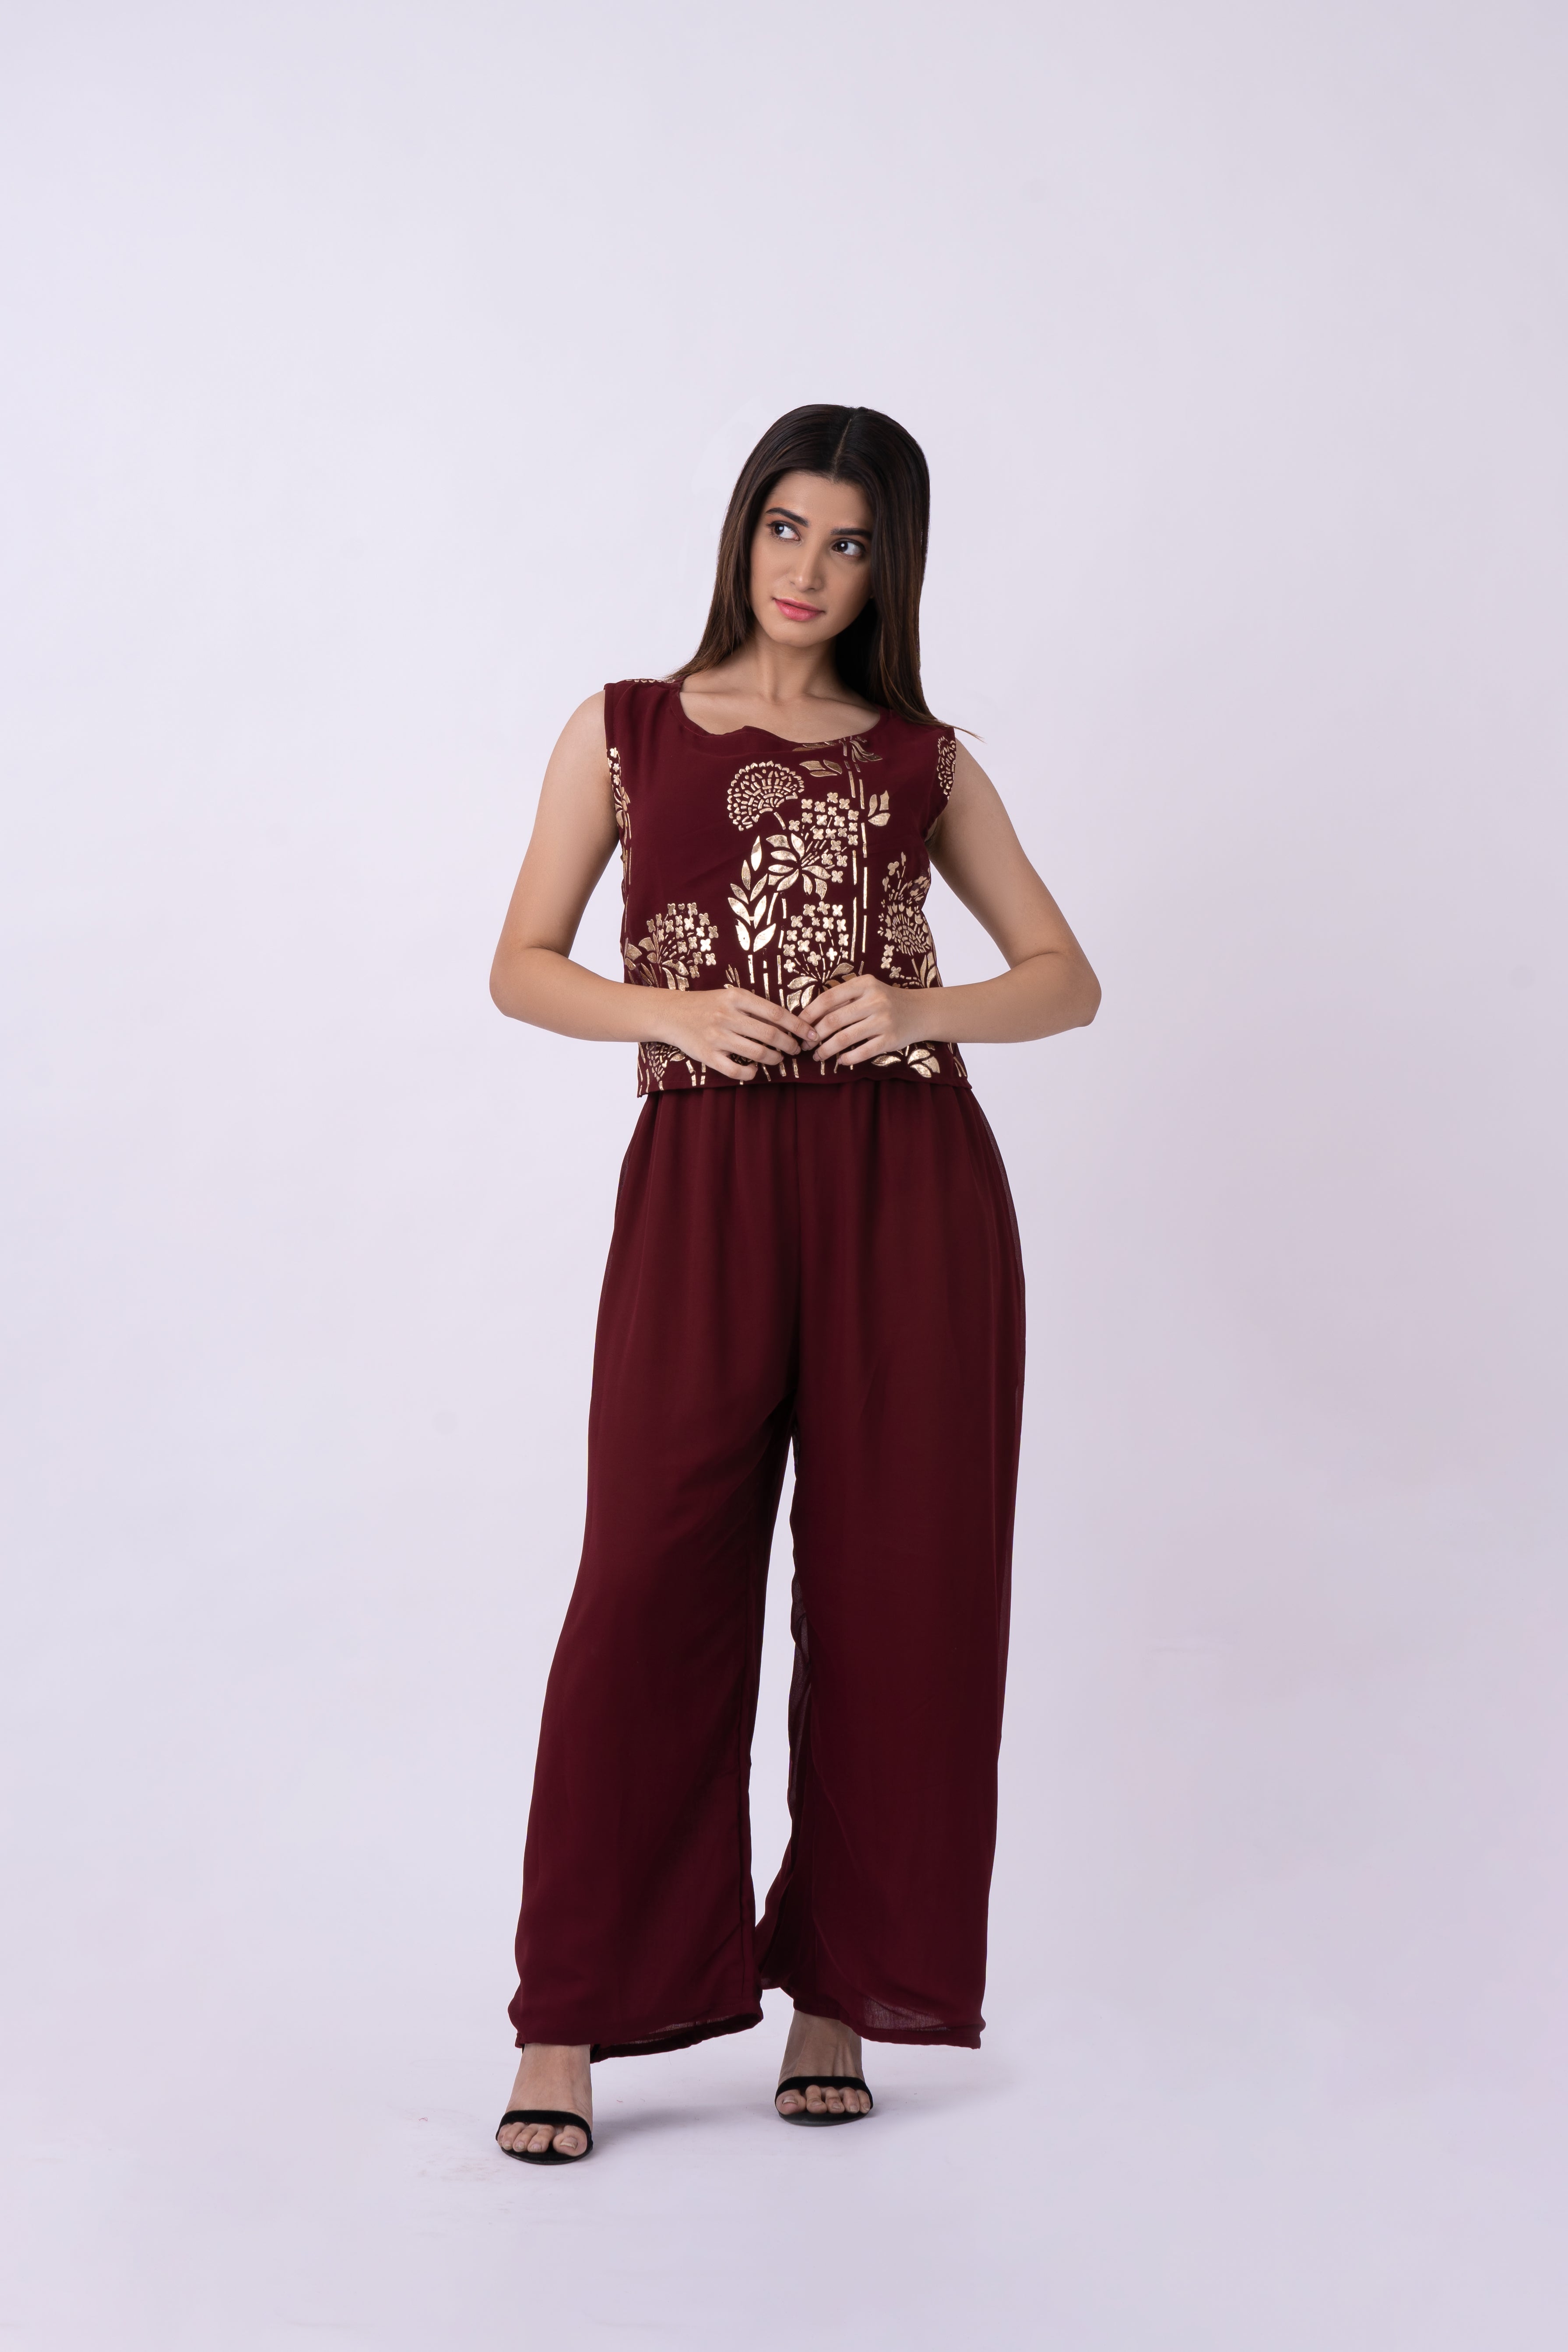 Vedic Maroon Embroidered Jumpsuit for Women